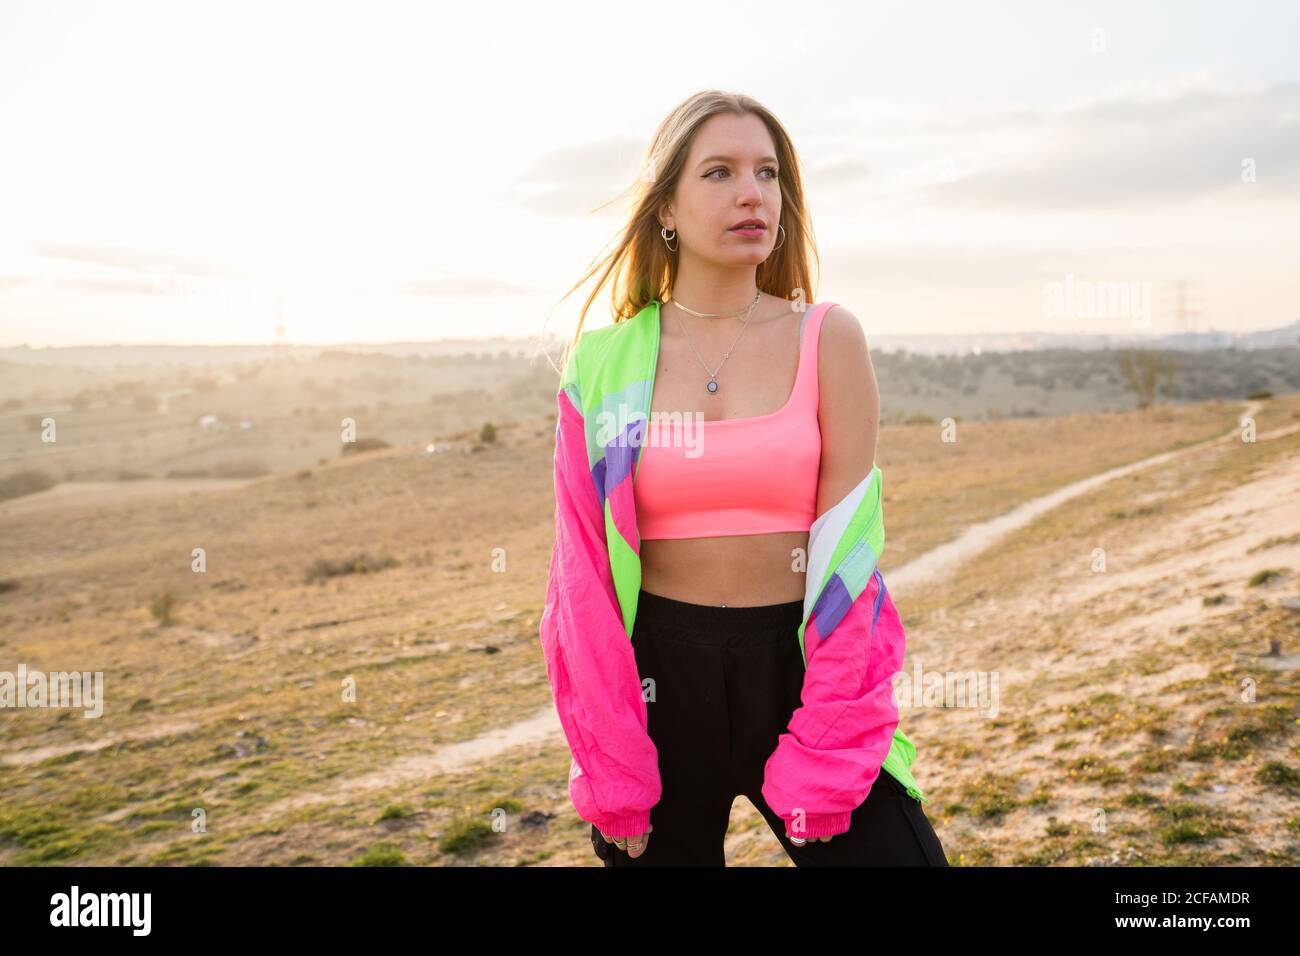 Contemporary blond haired young Woman in pink bra with colorful jacket looking away with remote land on background Stock Photo